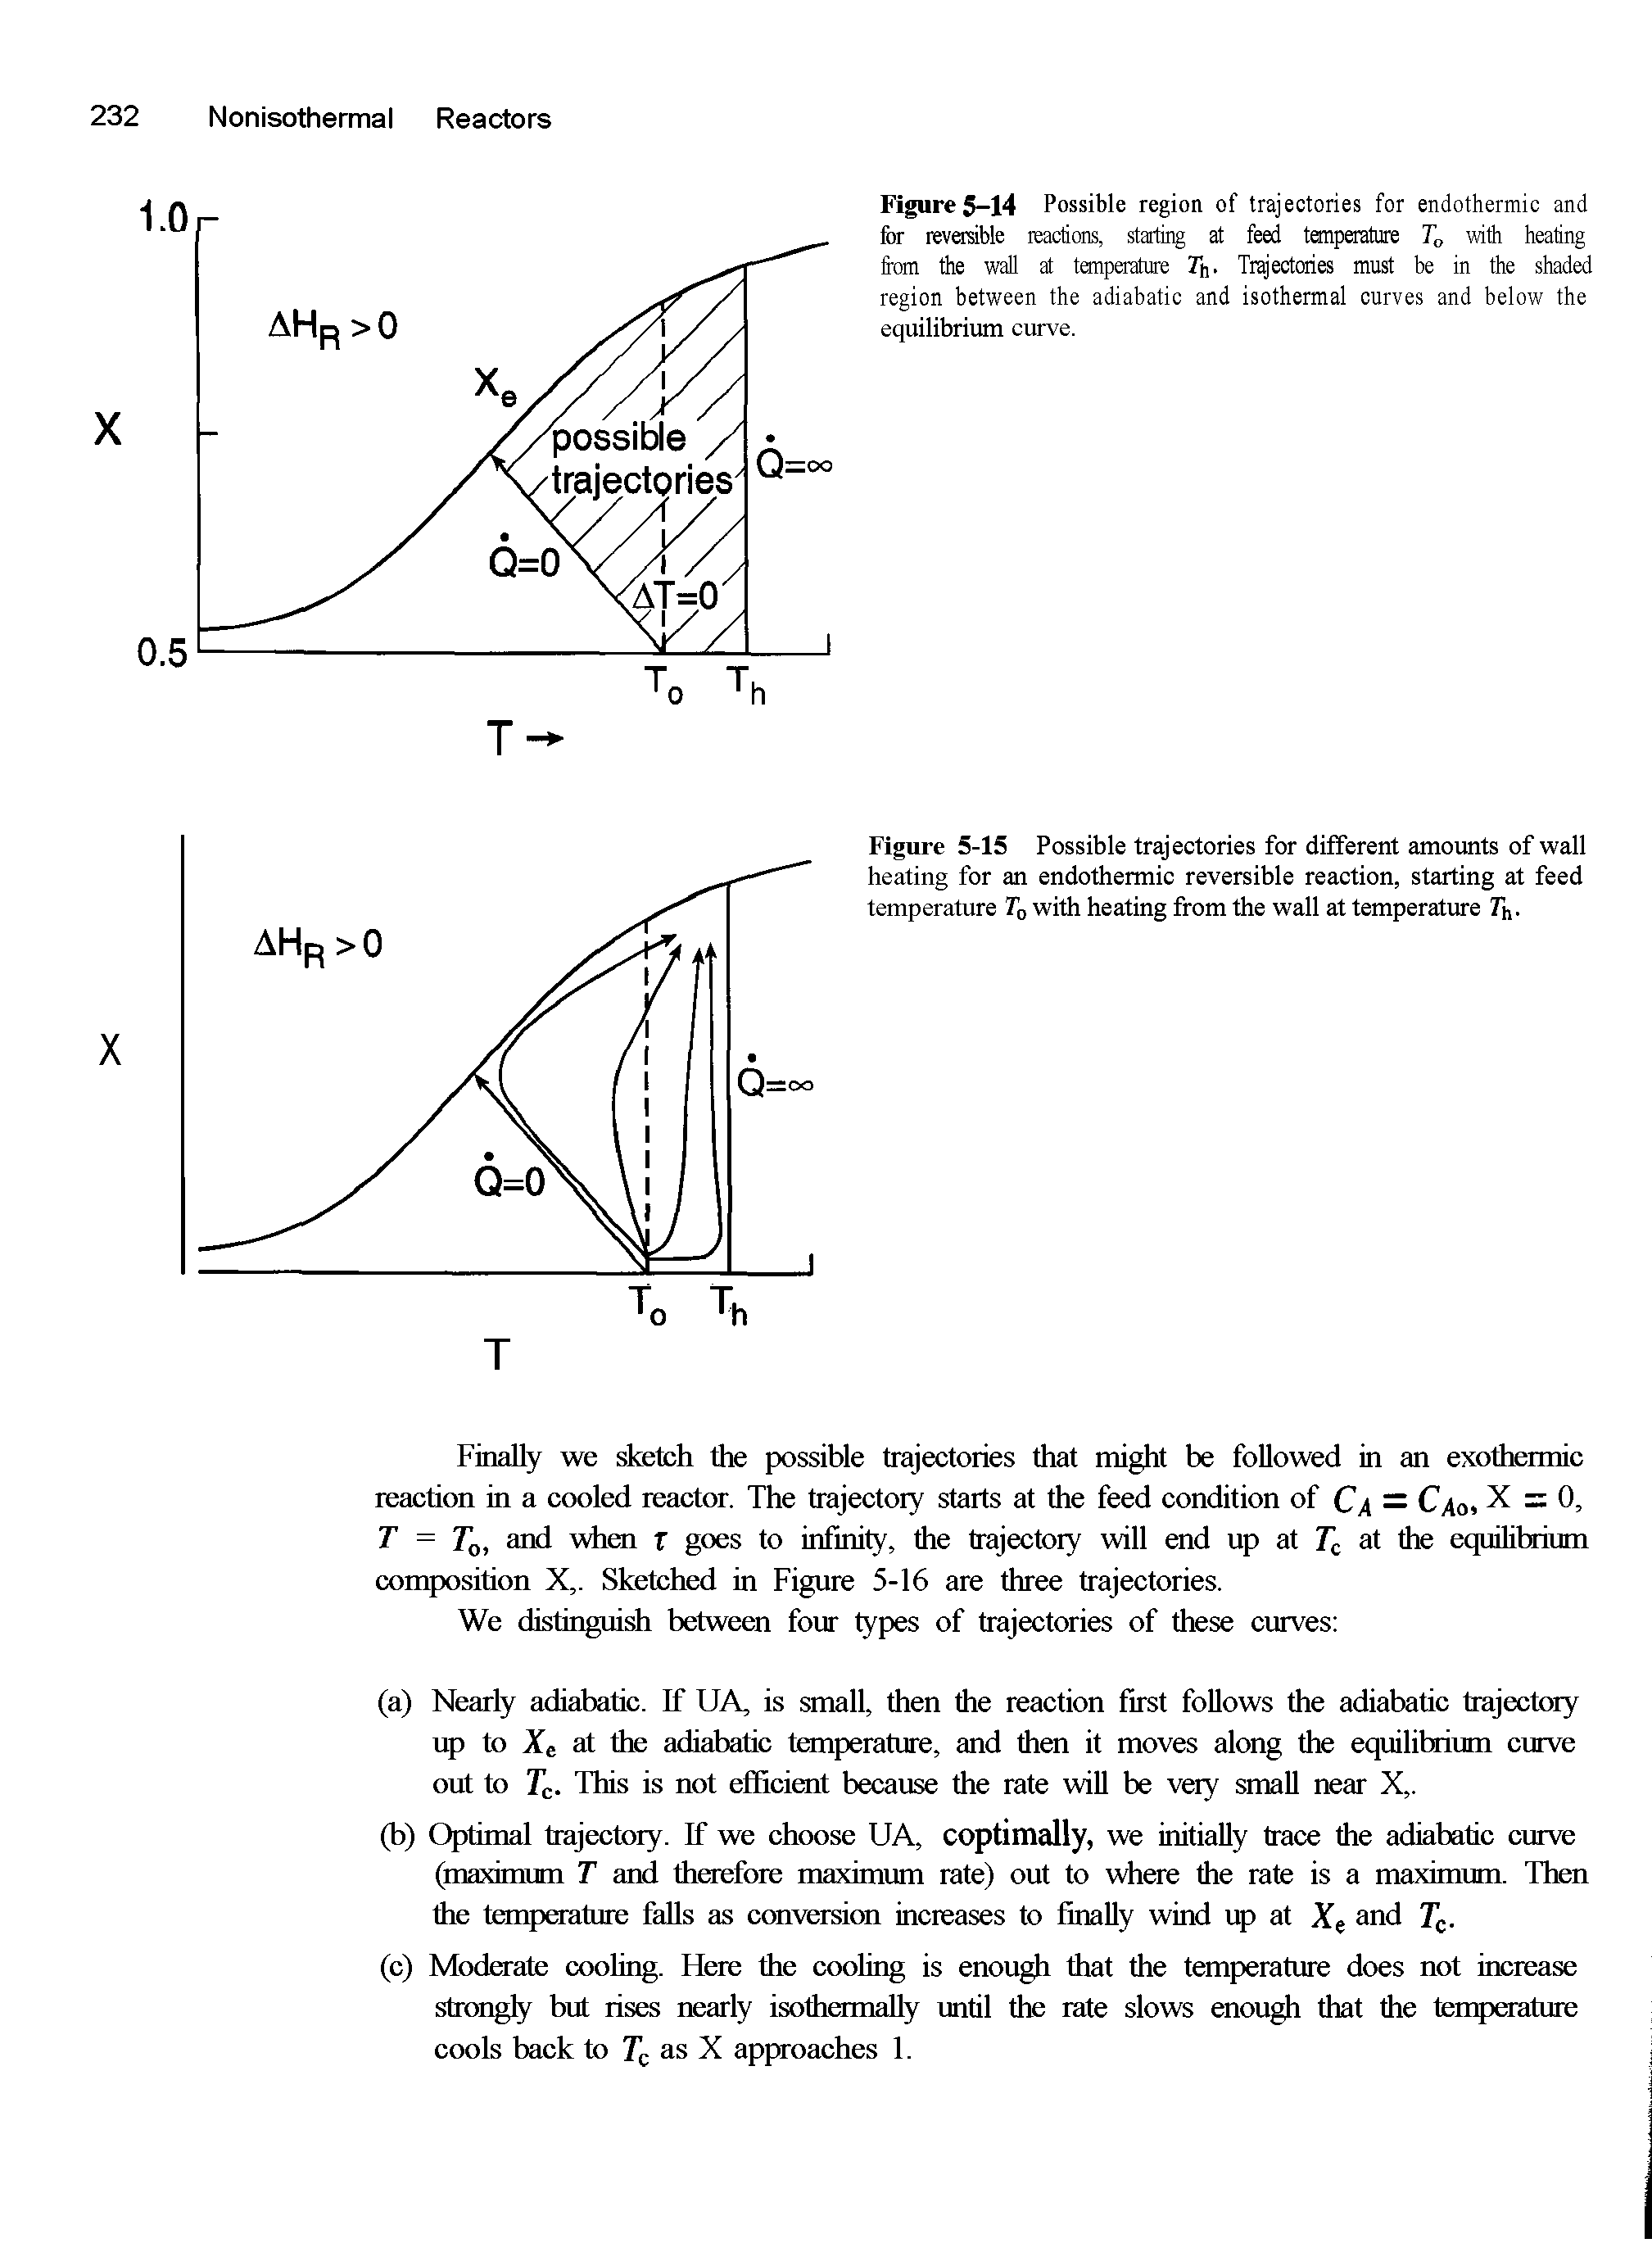 Figures—14 Possible region of trajectories for endothermic and for reversible reactions, starting at feed temperature Tj, with heating from the wall at temperature Ti,. Trajectories must be in the shaded region between the adiabatic and isothermal curves and below the equilibrium curve.